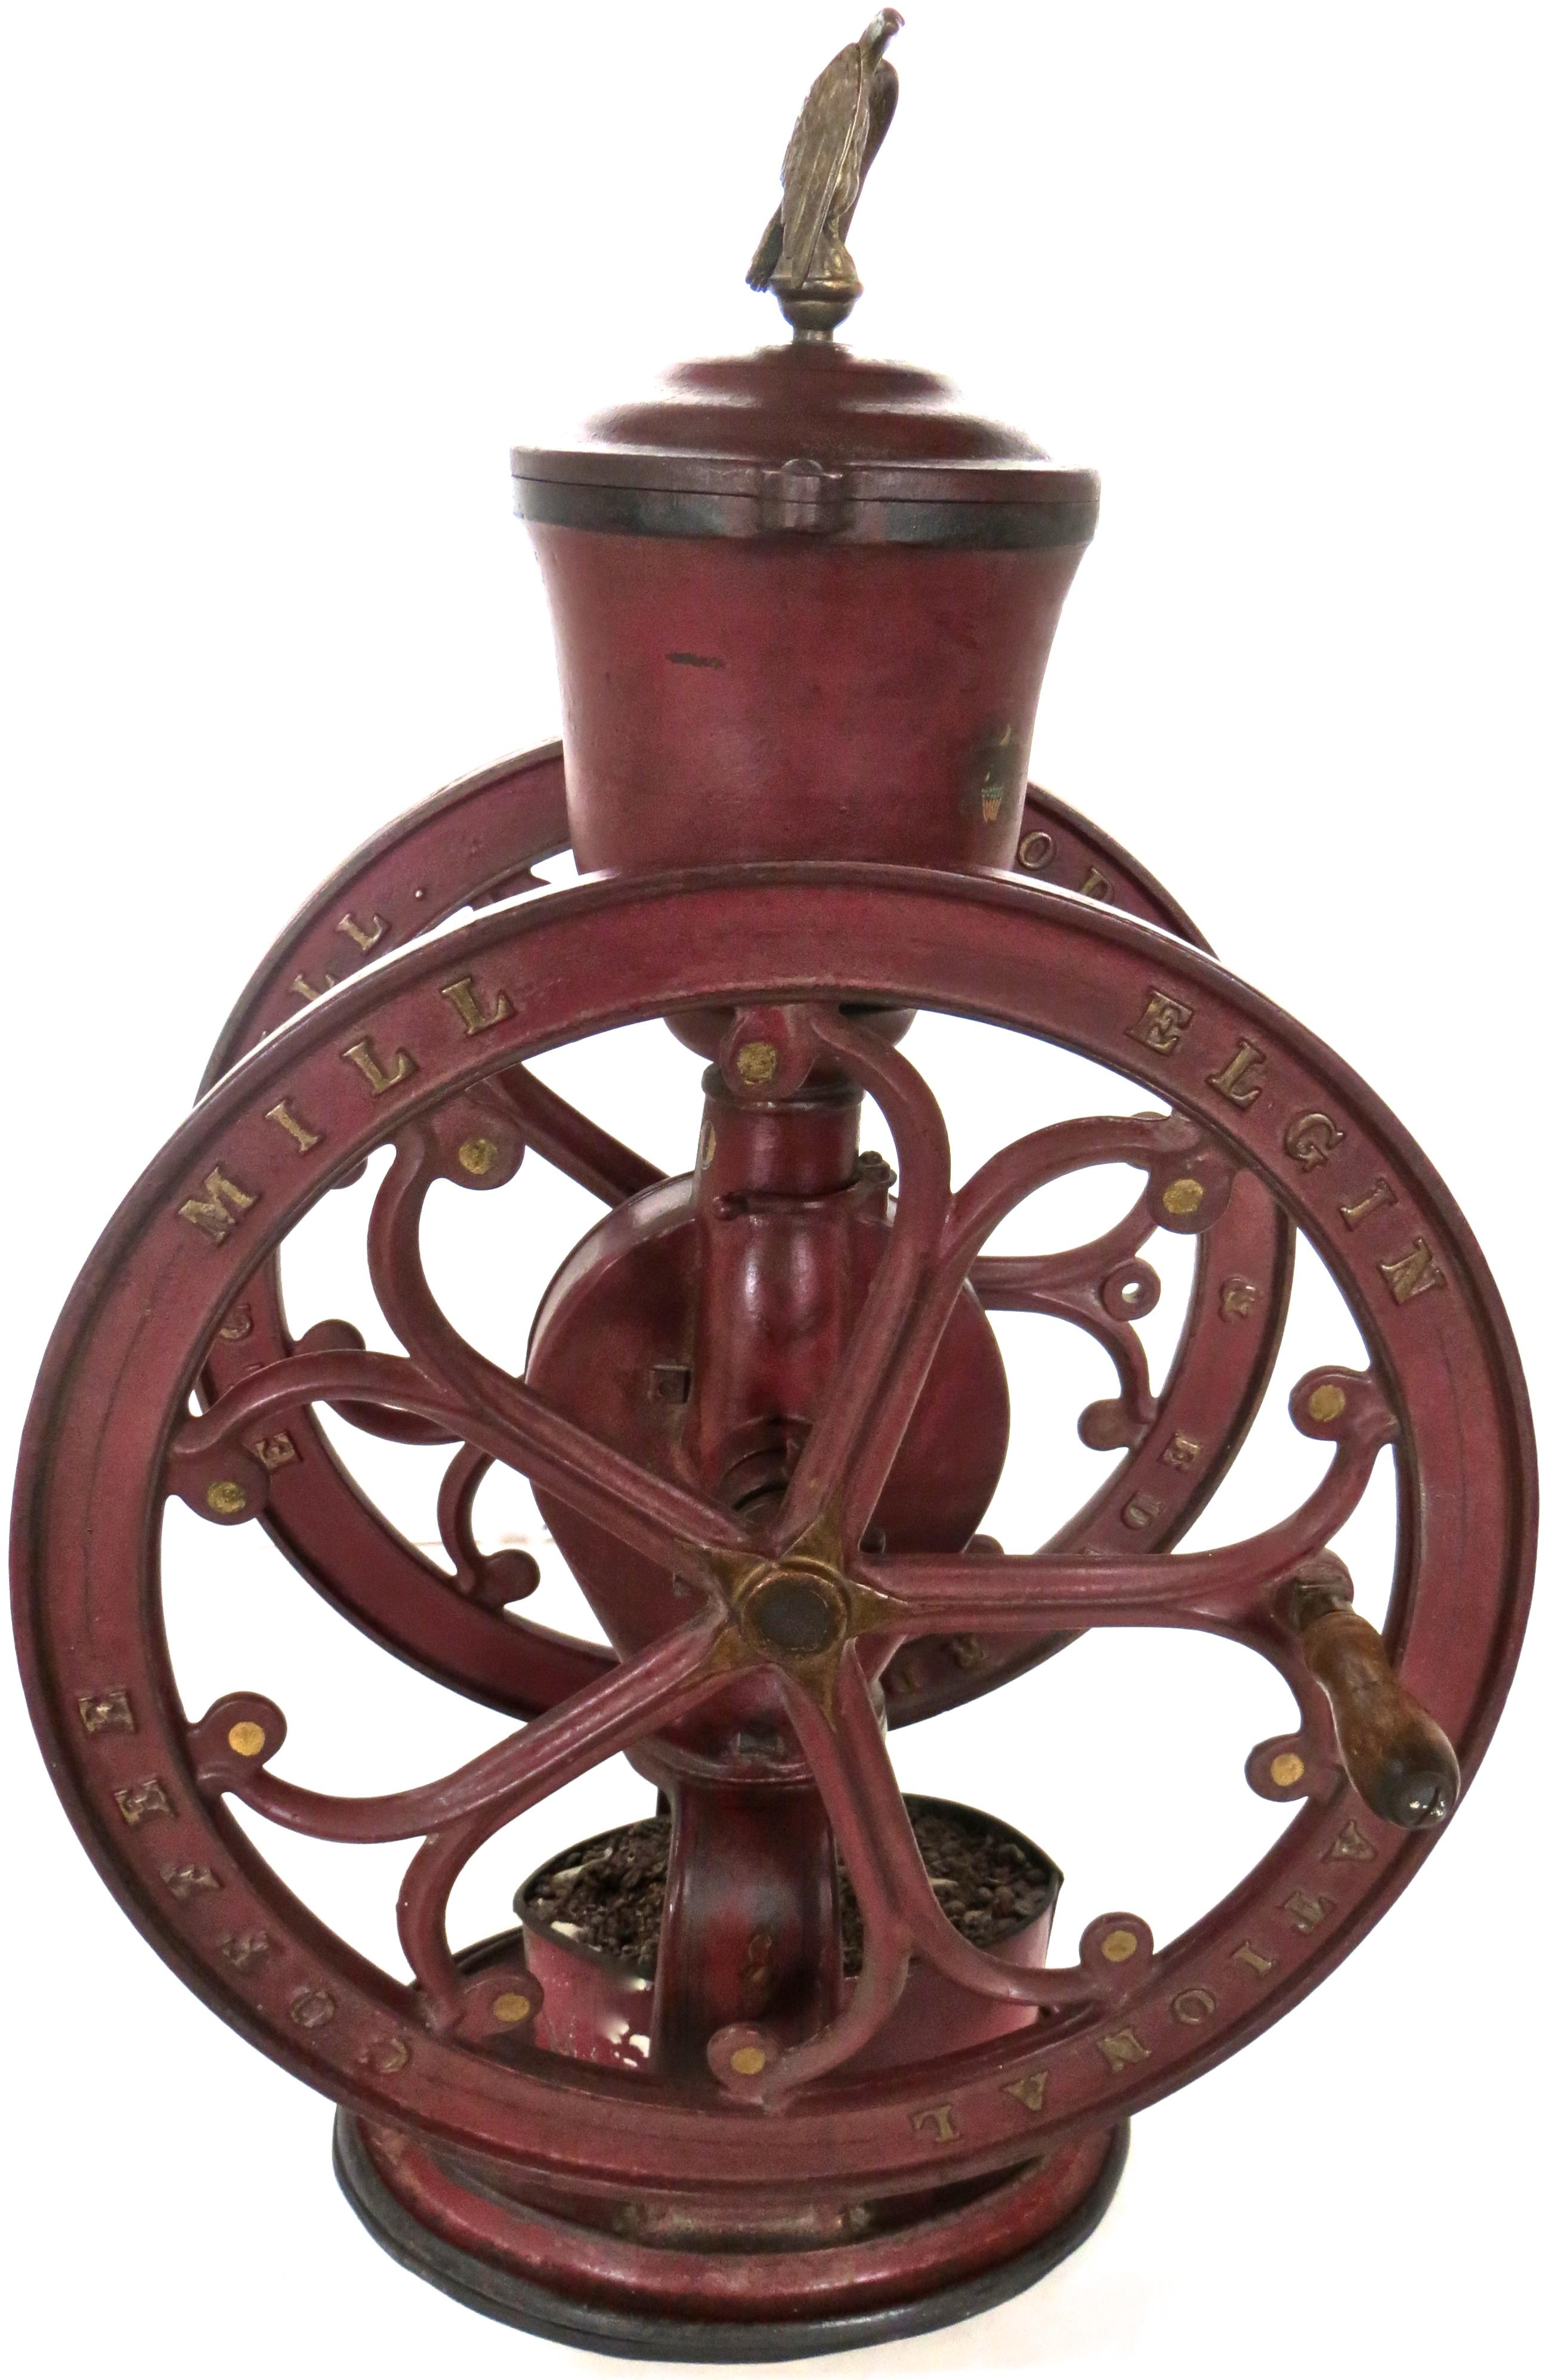 This all original turn of the century coffee grinder was made commercially for the grinding of coffee in large quantities, thus it would have been on a counter top in a general store or used in places like hotels and restaurants. It is a great